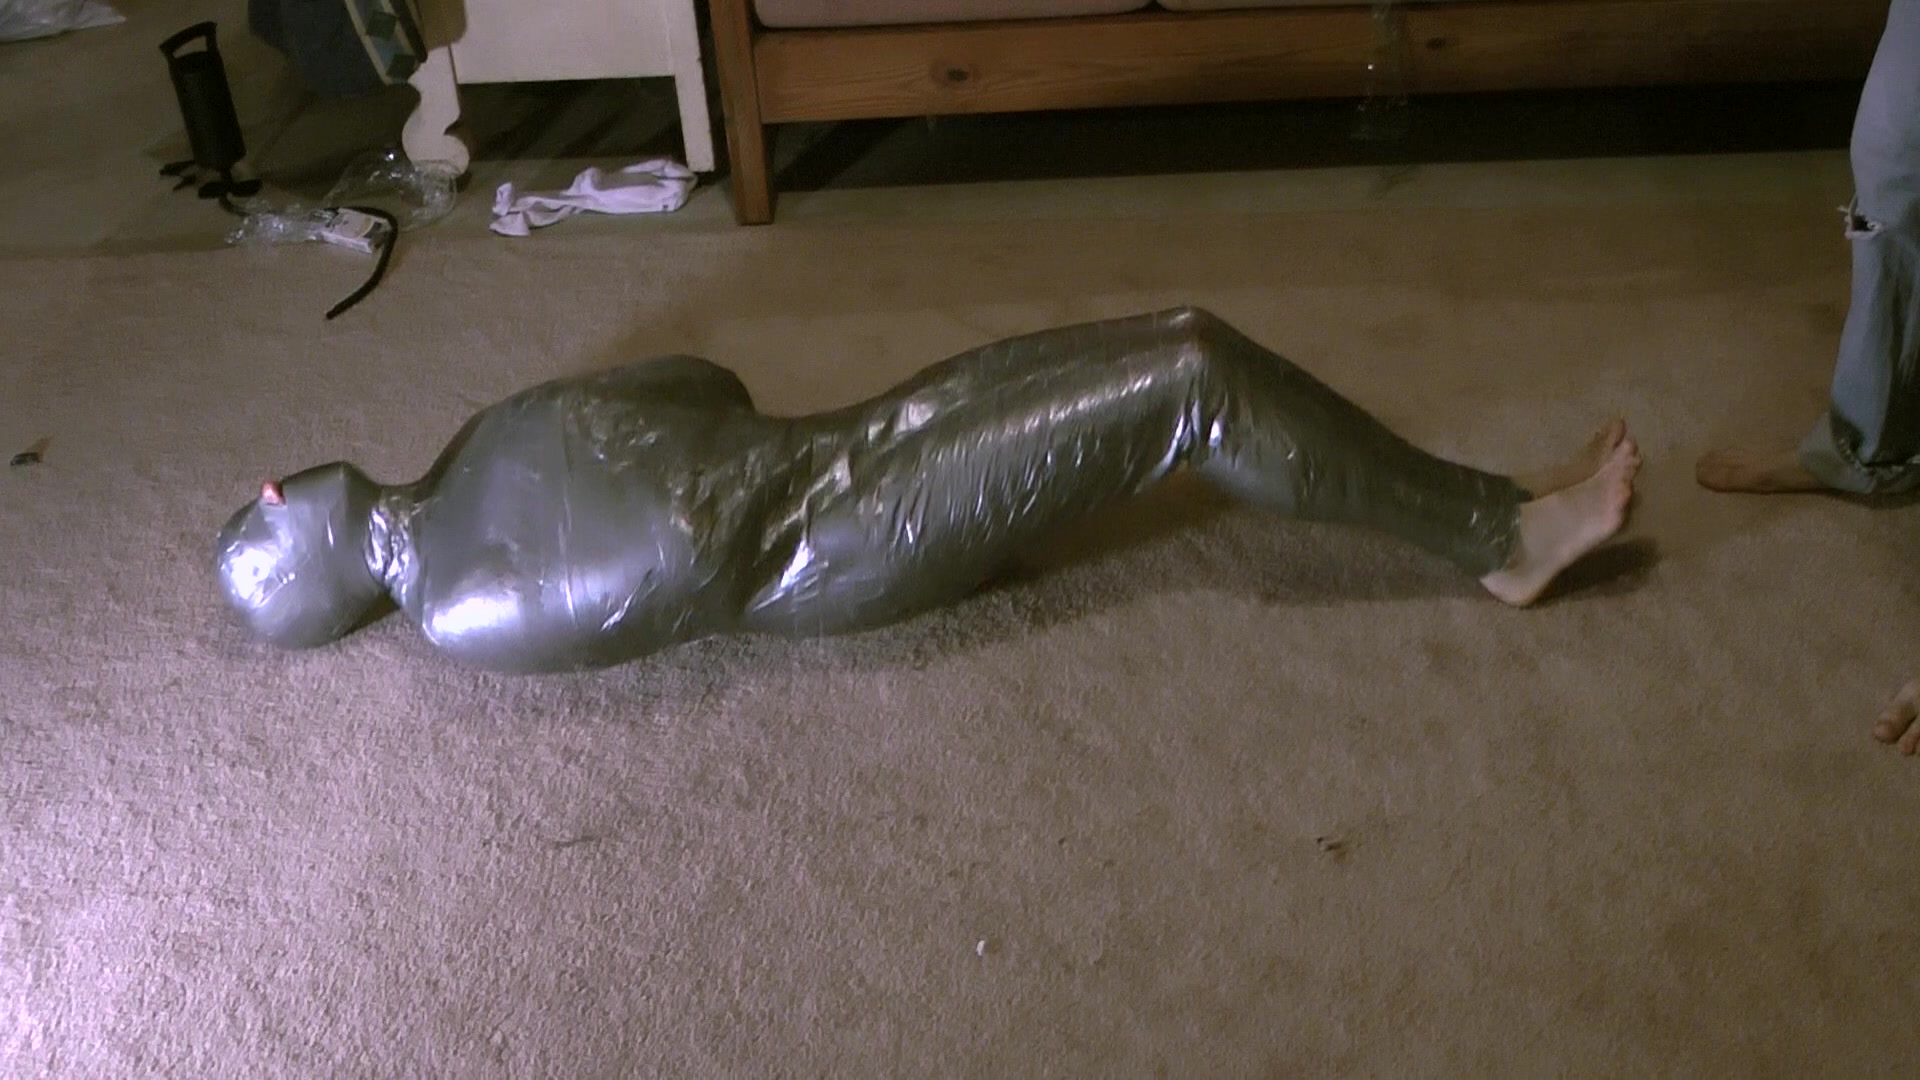 dayna manning recommends duct tape mummy bondage pic